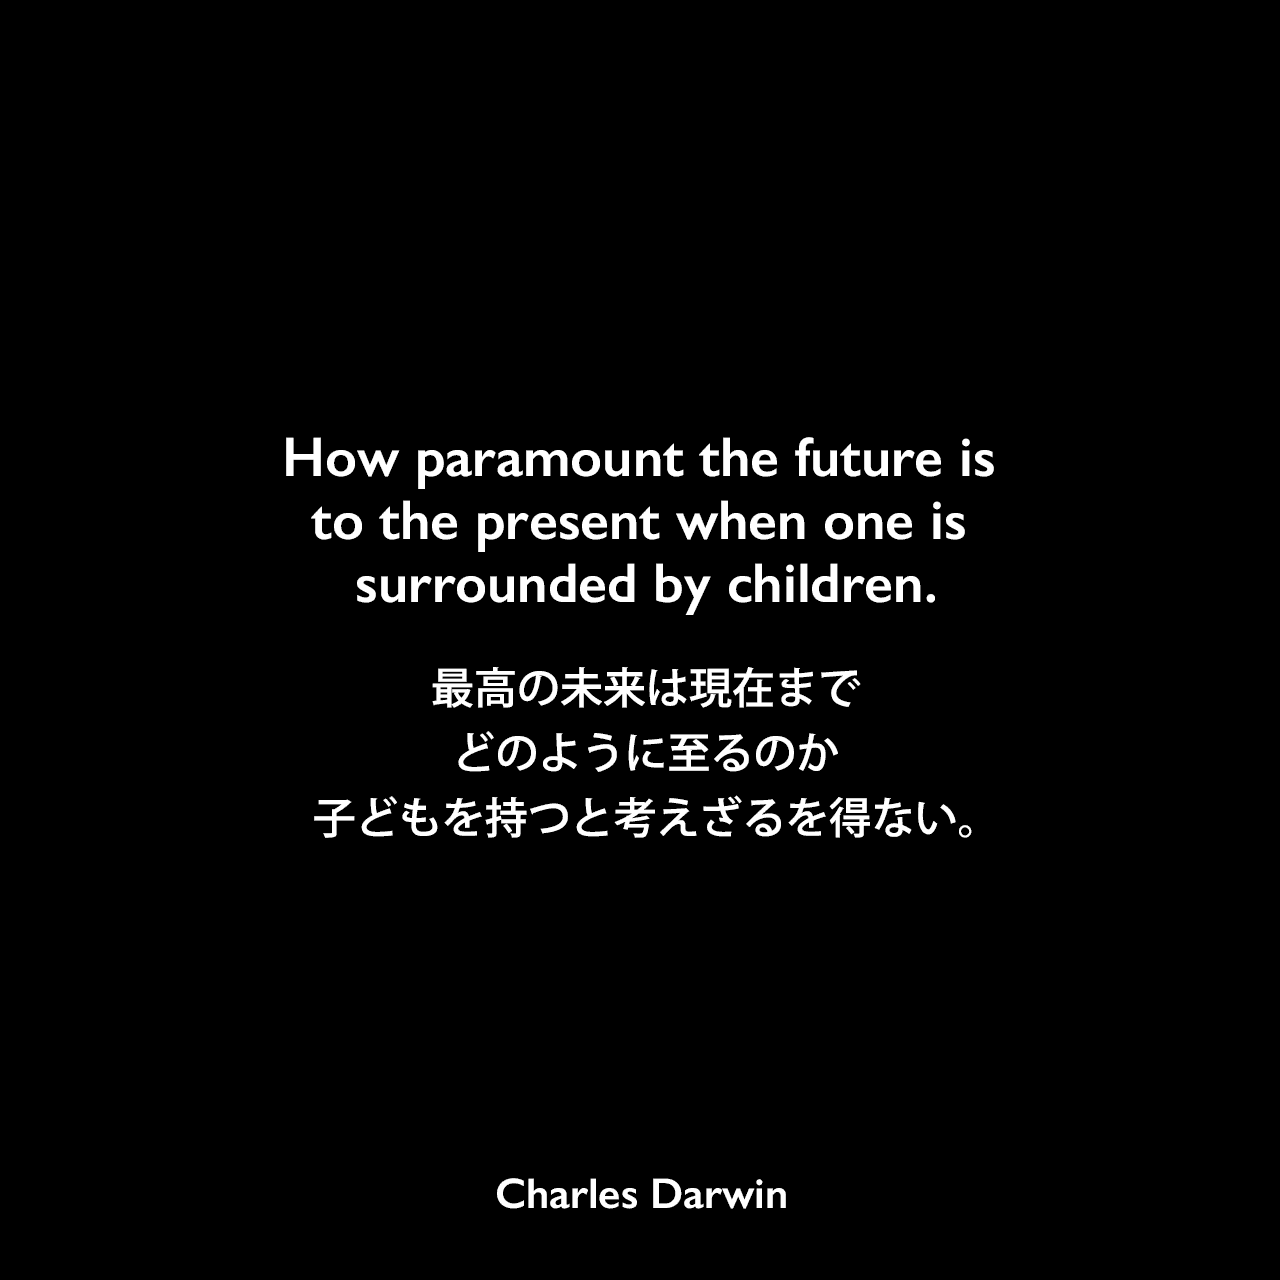 How paramount the future is to the present when one is surrounded by children.最高の未来は現在までどのように至るのか、子どもを持つと考えざるを得ない。Charles Darwin